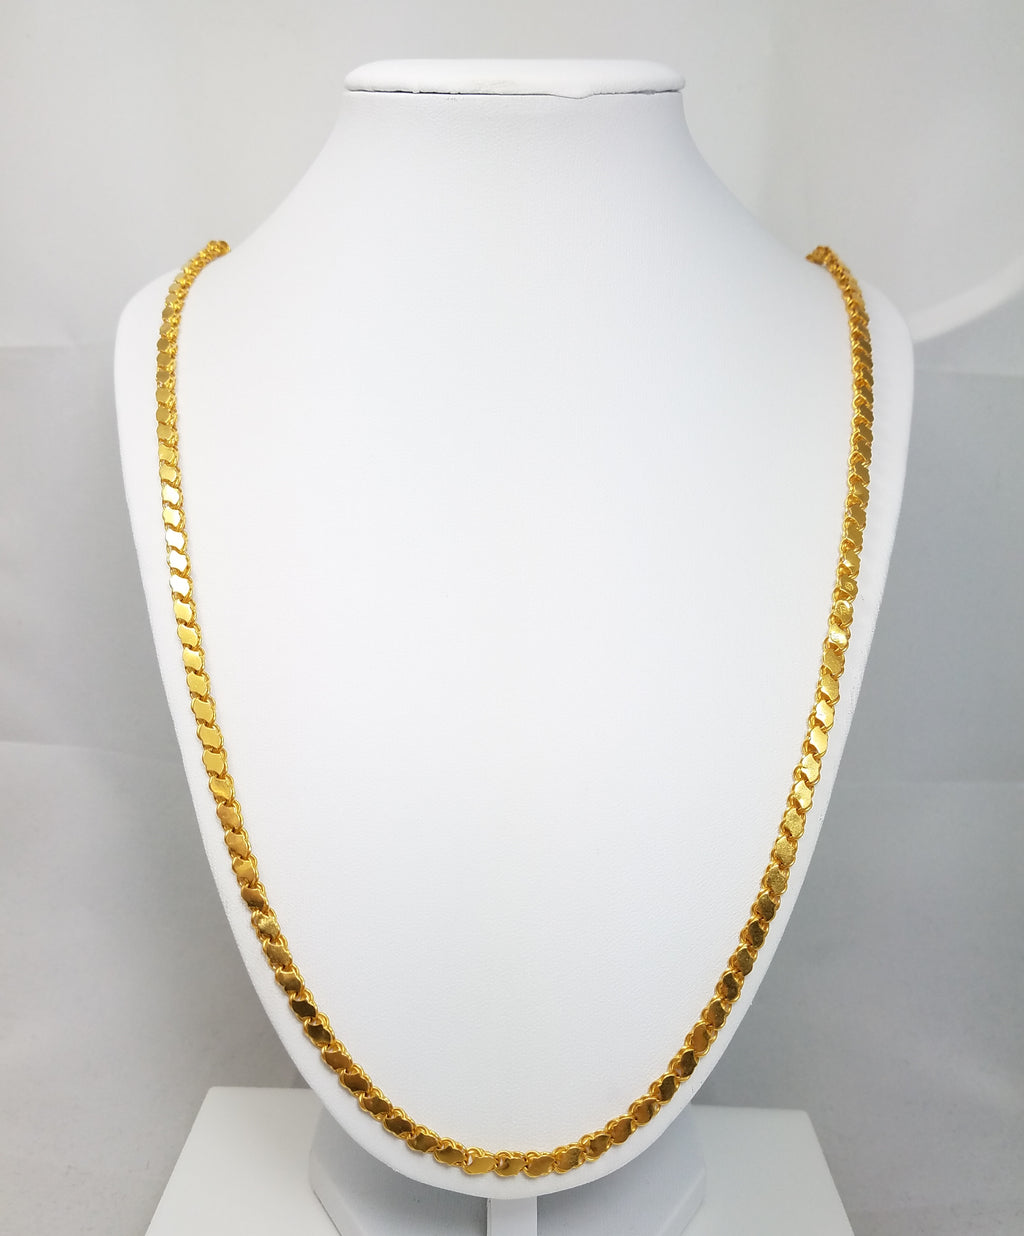 25" 21k Solid Yellow Gold Fancy Link Chain Necklace